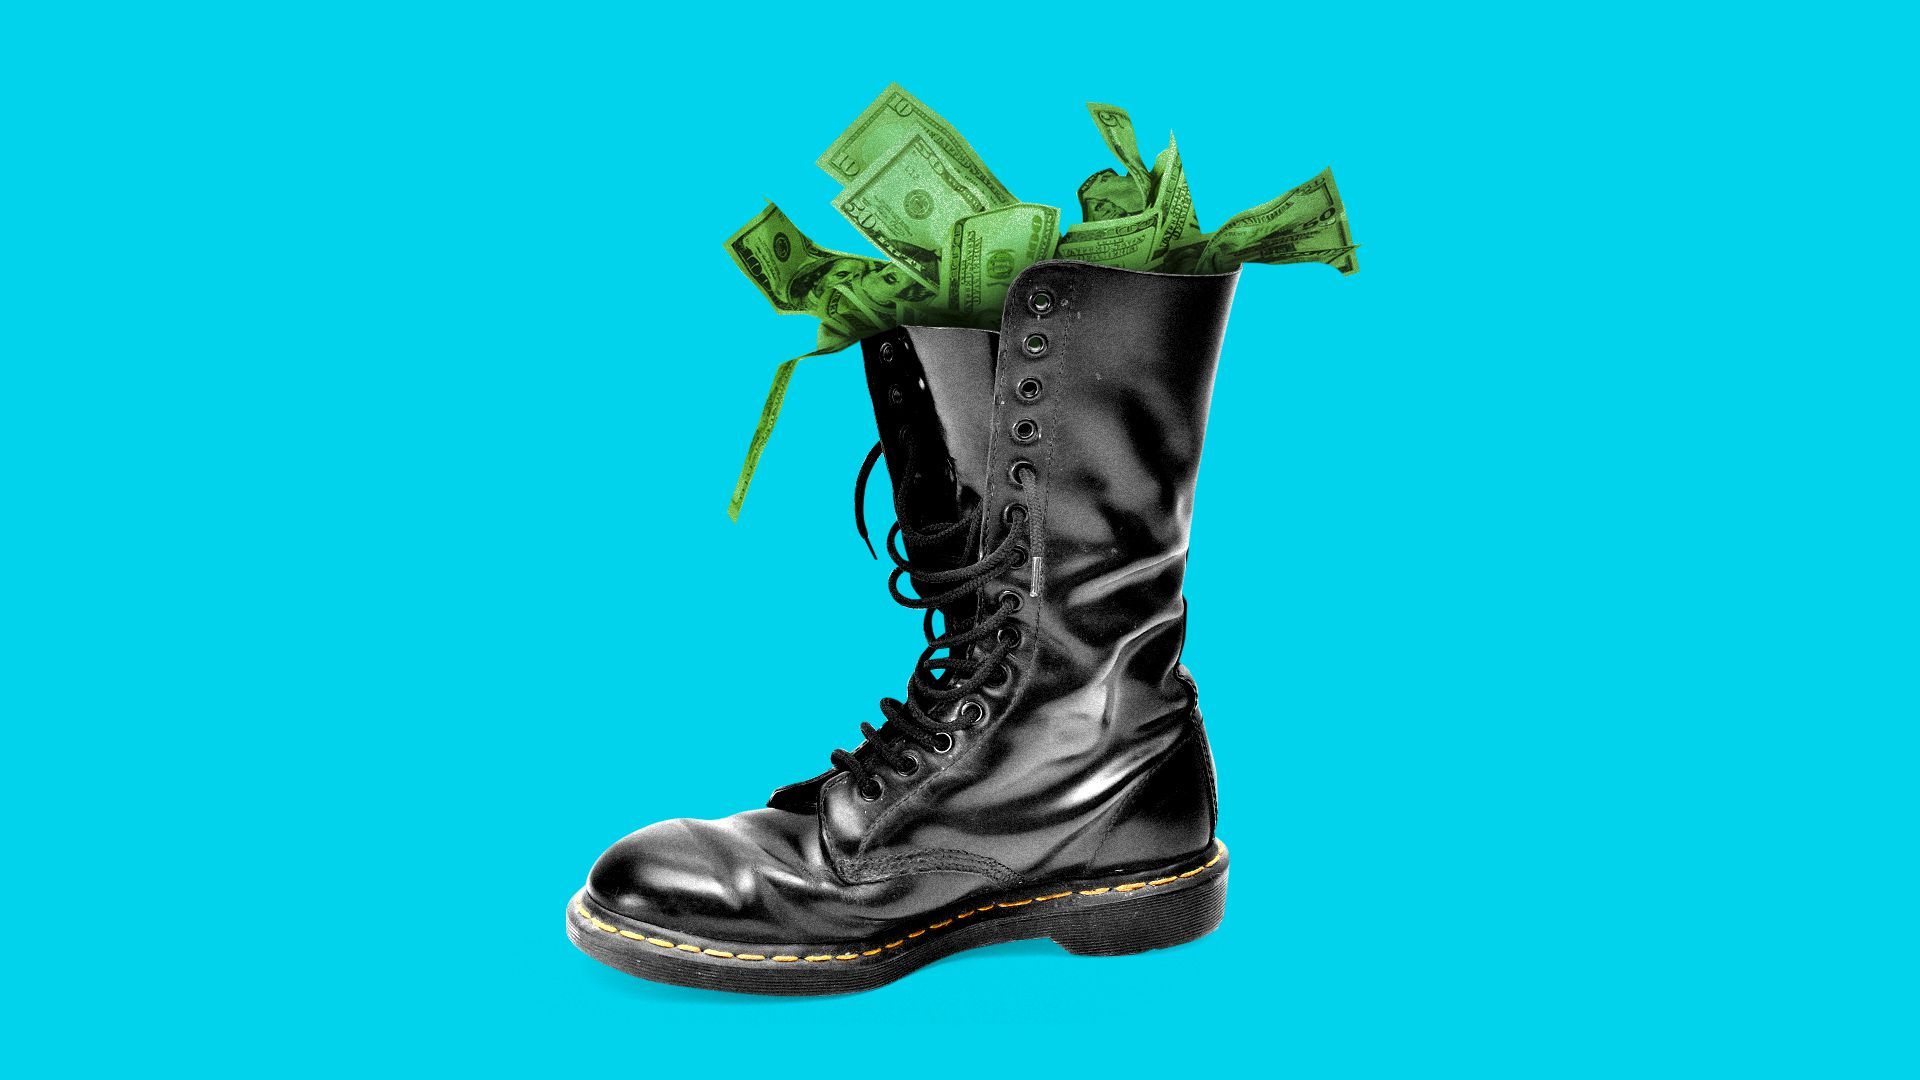 Illustration of a boot full of cash. 